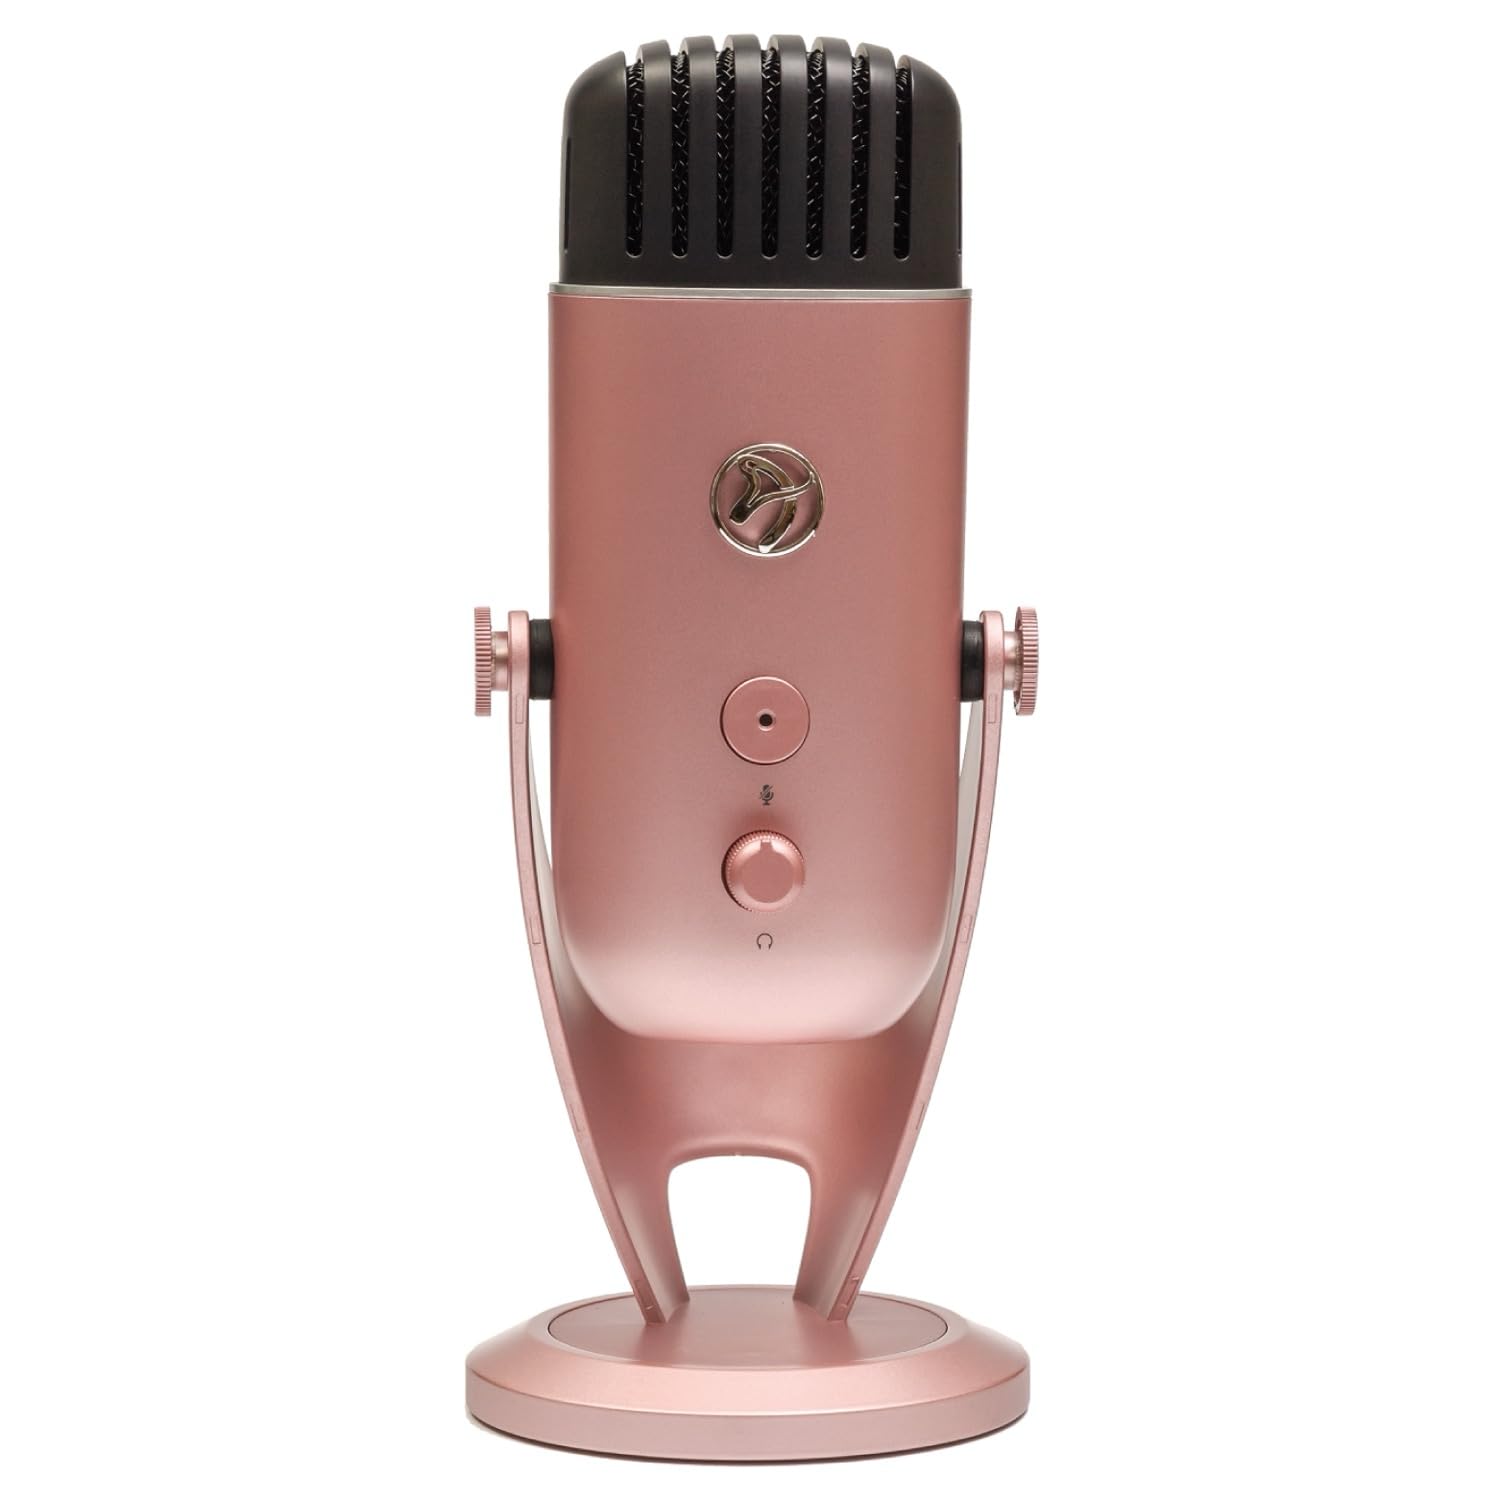 Arozzi Colonna Professional USB Condenser Microphone for PC, Mac, Gaming, Recording, Streaming, Podcasting on PC, Desktop Mic with Multi Pick-up Patterns - Rose Gold